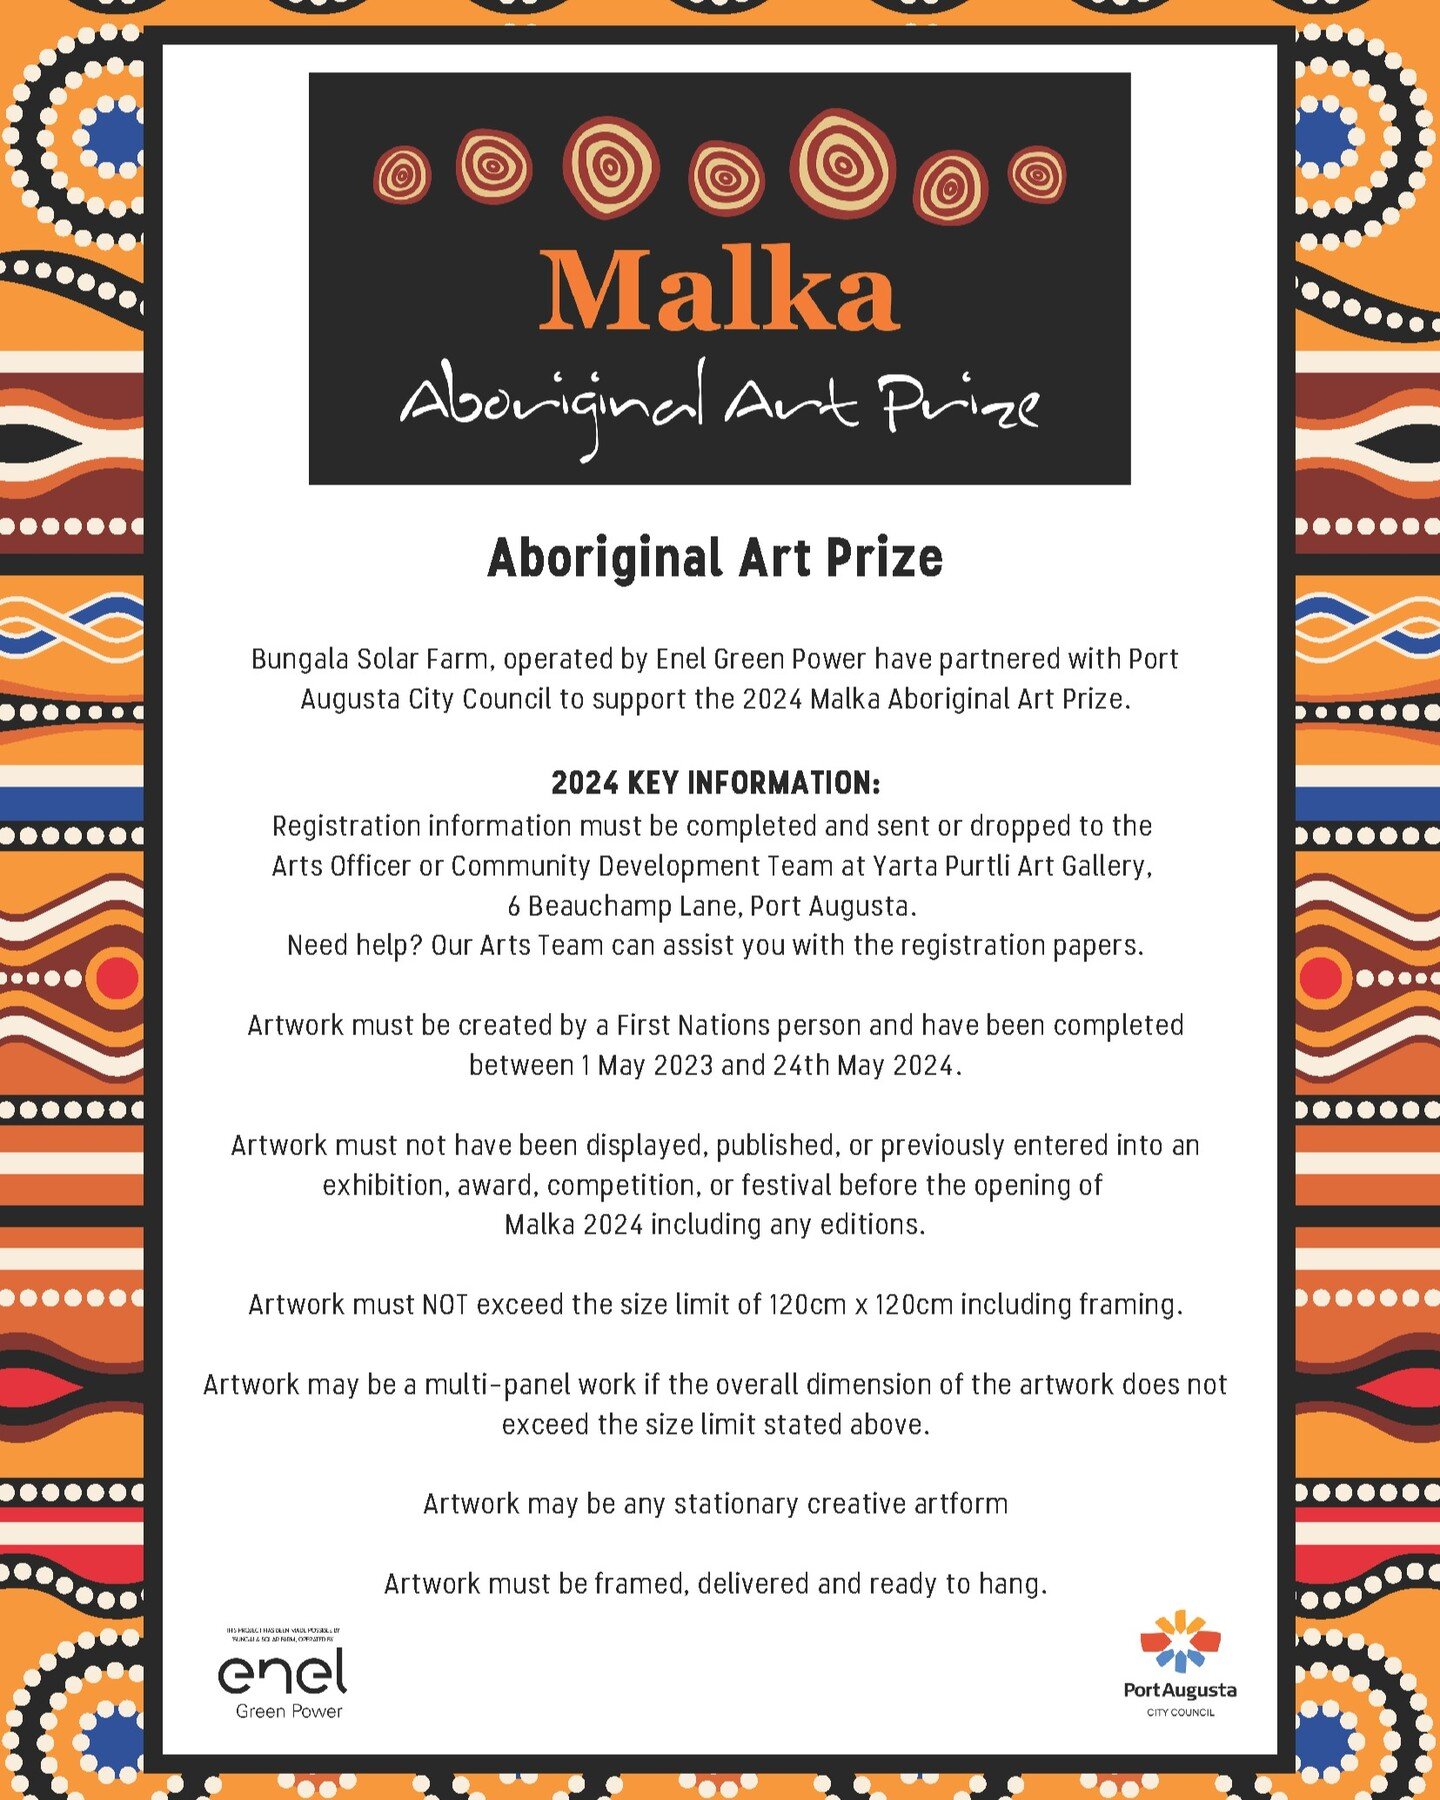 MALKA ABORIGINAL ART PRIZE // Registrations are now open for the 2024 Malka Aboriginal Art Prize! Head to the link in our bio for further details including eligibility criteria and artists registration forms.
&bull;
Ku Arts will again be sponsoring a